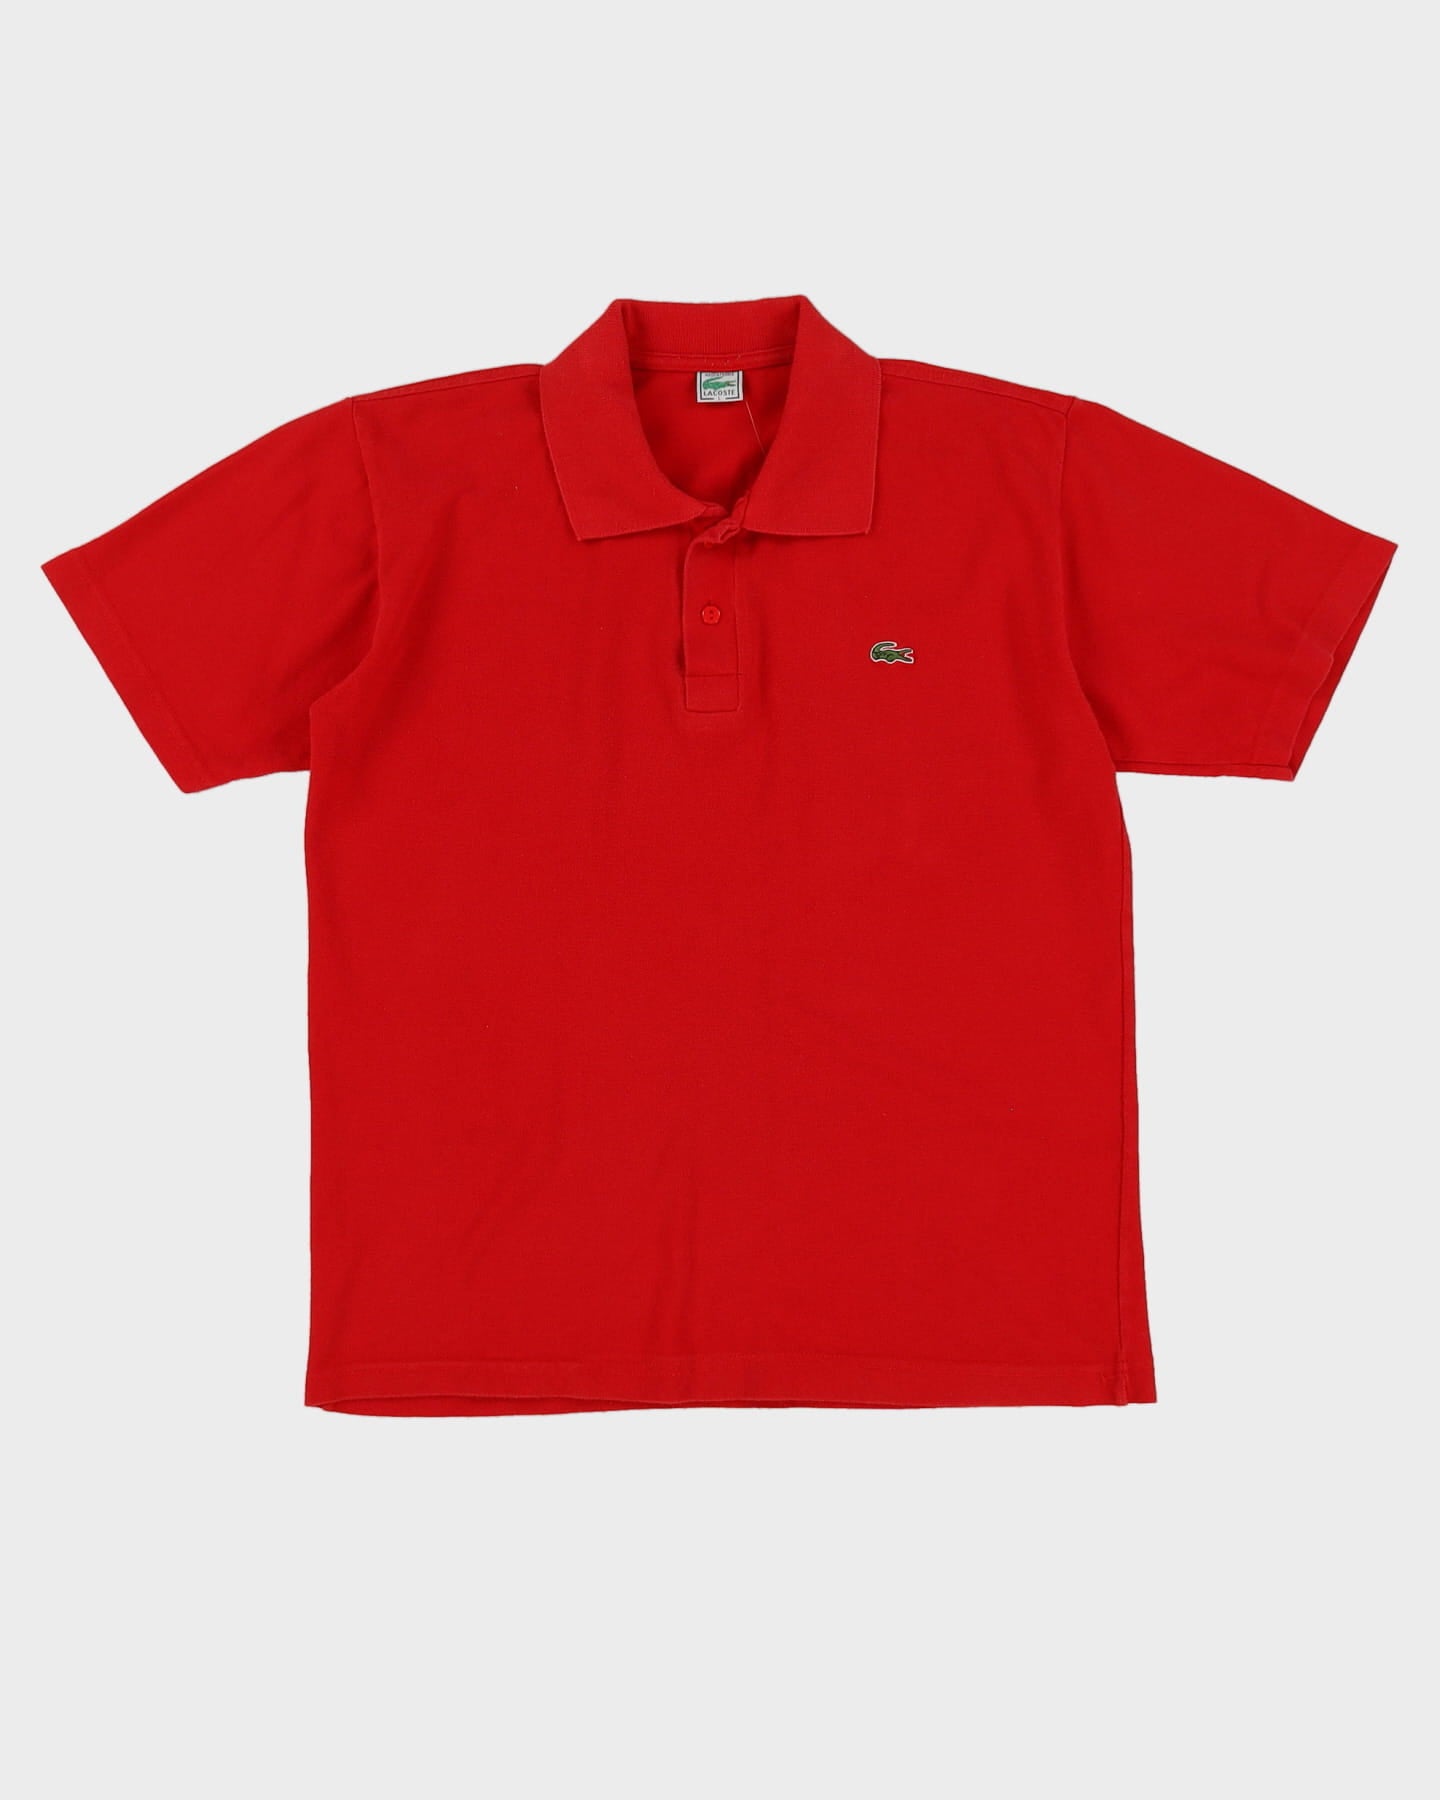 Vintage 80s Lacoste Red Polo Shirt - L